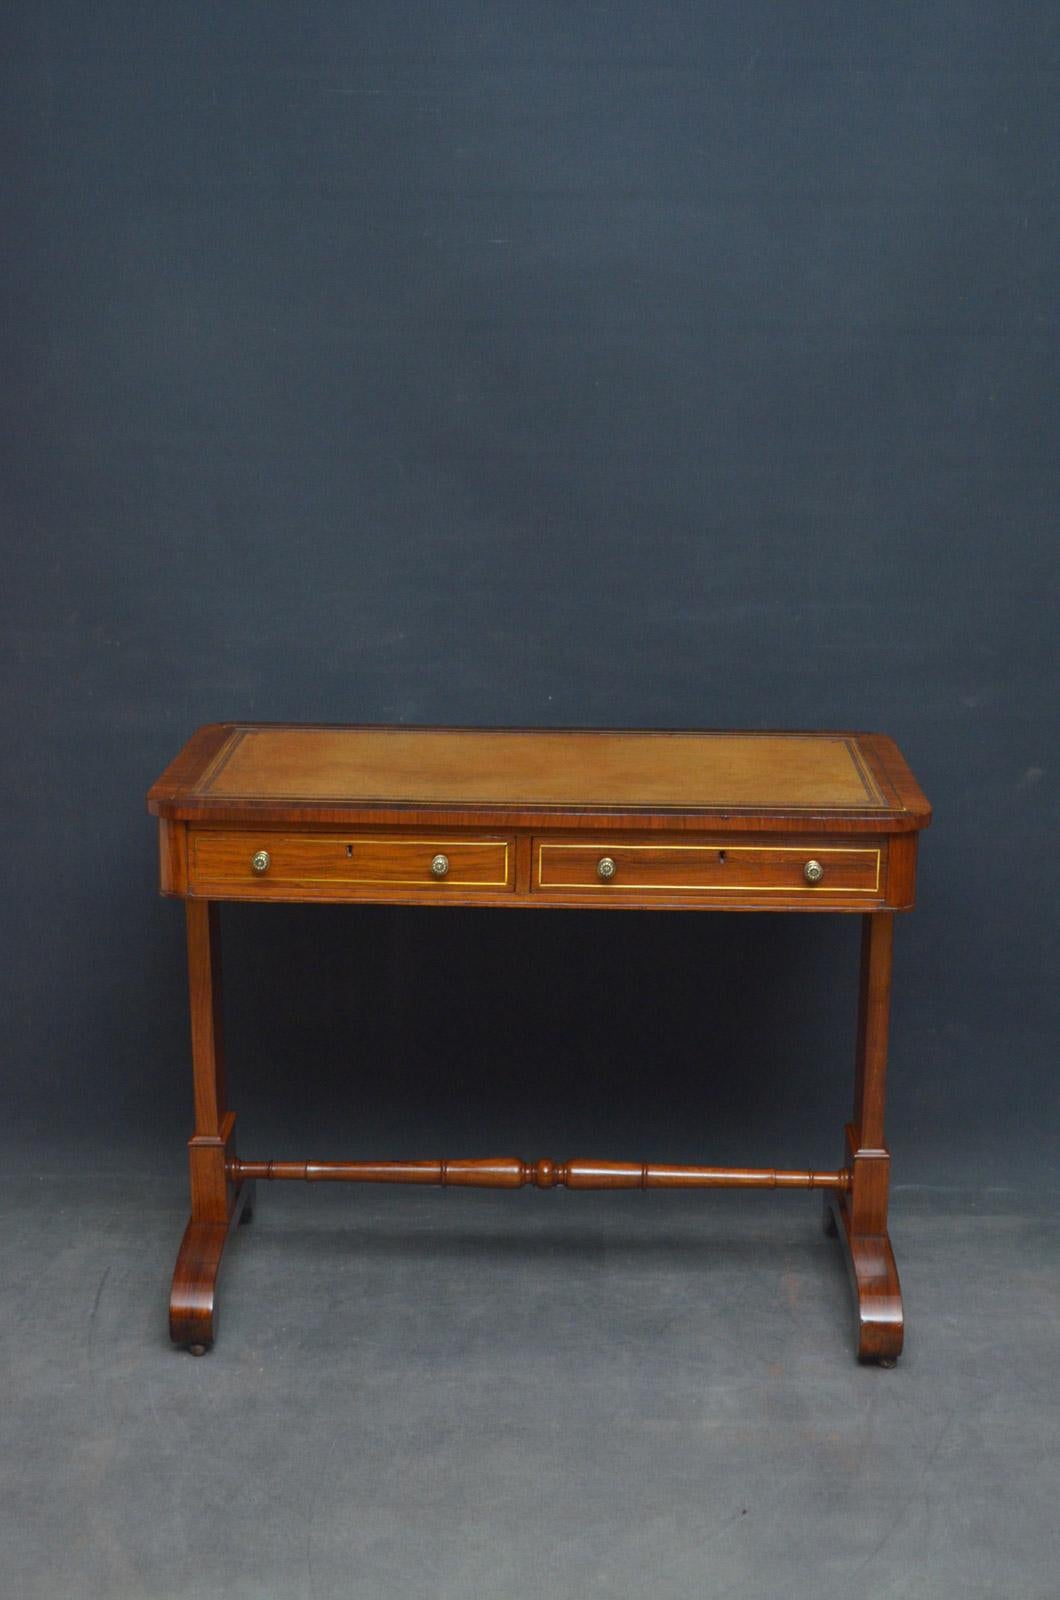 Sn4567 Elegant William IV writing table / library table in rosewood, having brass inlaid top with tan leather writing surface and 2 brass inlaid frieze drawers fitted with brass handles, all standing on simple supports terminating in downswept legs